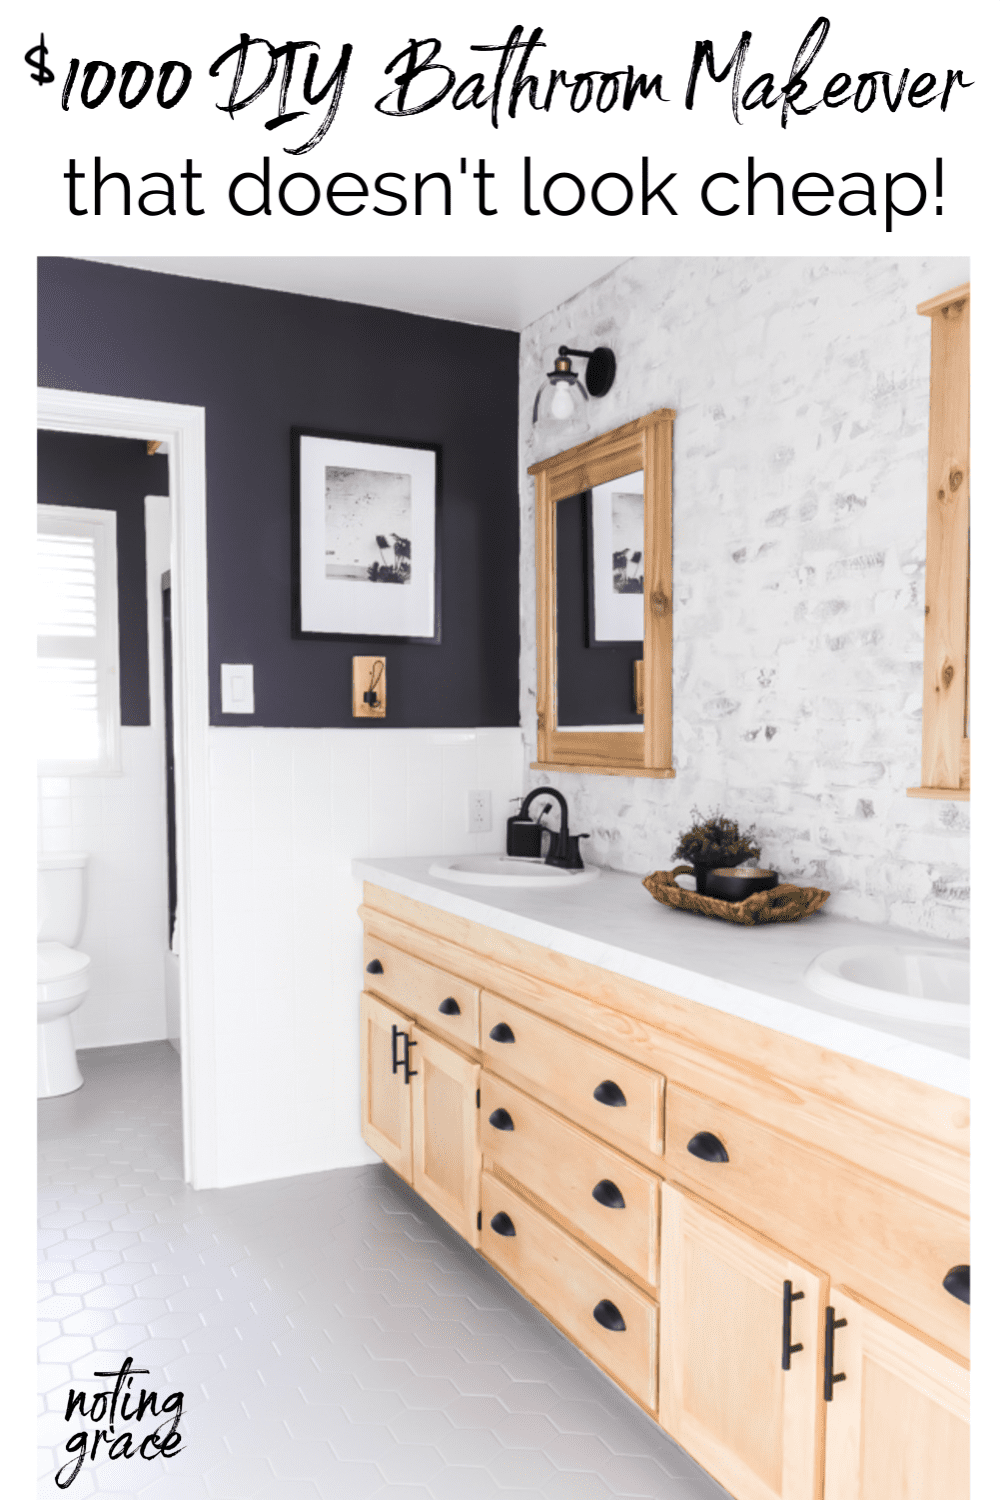 1000 Diy Bathroom Makeover That Doesn, How To Renovate An Old Bathroom On A Budget